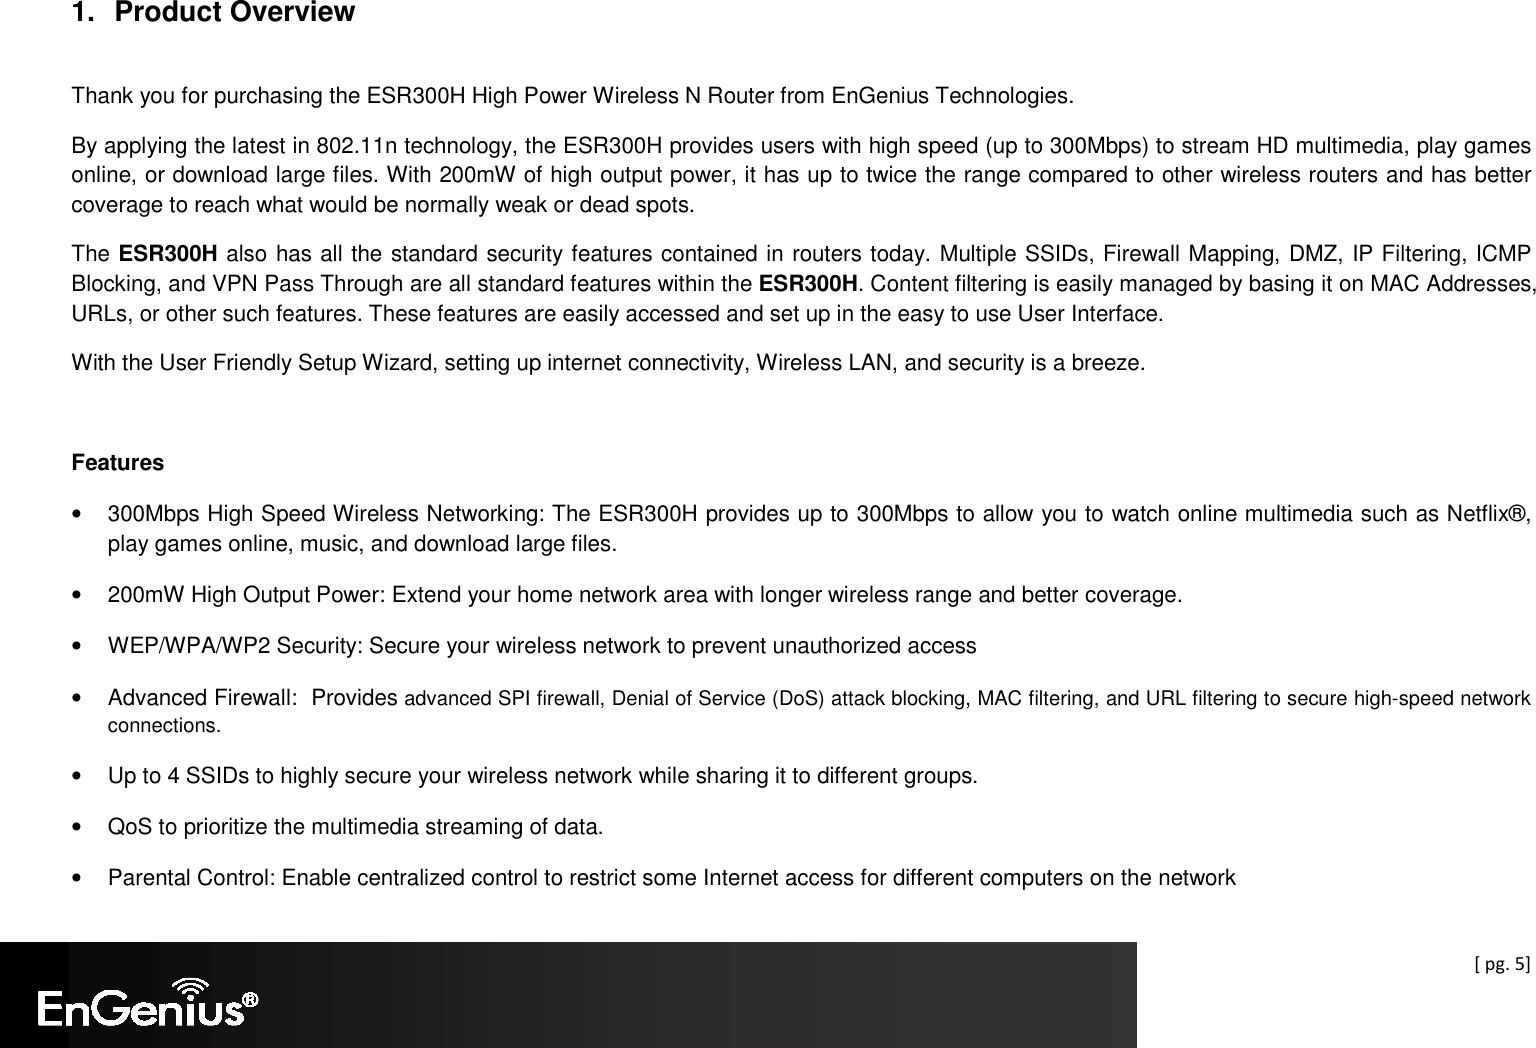  [ pg. 5]  1.  Product Overview  Thank you for purchasing the ESR300H High Power Wireless N Router from EnGenius Technologies.  By applying the latest in 802.11n technology, the ESR300H provides users with high speed (up to 300Mbps) to stream HD multimedia, play games online, or download large files. With 200mW of high output power, it has up to twice the range compared to other wireless routers and has better coverage to reach what would be normally weak or dead spots. The ESR300H also has all the standard security features contained in routers today. Multiple SSIDs, Firewall Mapping, DMZ, IP Filtering, ICMP Blocking, and VPN Pass Through are all standard features within the ESR300H. Content filtering is easily managed by basing it on MAC Addresses, URLs, or other such features. These features are easily accessed and set up in the easy to use User Interface. With the User Friendly Setup Wizard, setting up internet connectivity, Wireless LAN, and security is a breeze.  Features •  300Mbps High Speed Wireless Networking: The ESR300H provides up to 300Mbps to allow you to watch online multimedia such as Netflix®, play games online, music, and download large files. •  200mW High Output Power: Extend your home network area with longer wireless range and better coverage. •  WEP/WPA/WP2 Security: Secure your wireless network to prevent unauthorized access •  Advanced Firewall:  Provides advanced SPI firewall, Denial of Service (DoS) attack blocking, MAC filtering, and URL filtering to secure high-speed network connections. •  Up to 4 SSIDs to highly secure your wireless network while sharing it to different groups. •  QoS to prioritize the multimedia streaming of data. •  Parental Control: Enable centralized control to restrict some Internet access for different computers on the network 